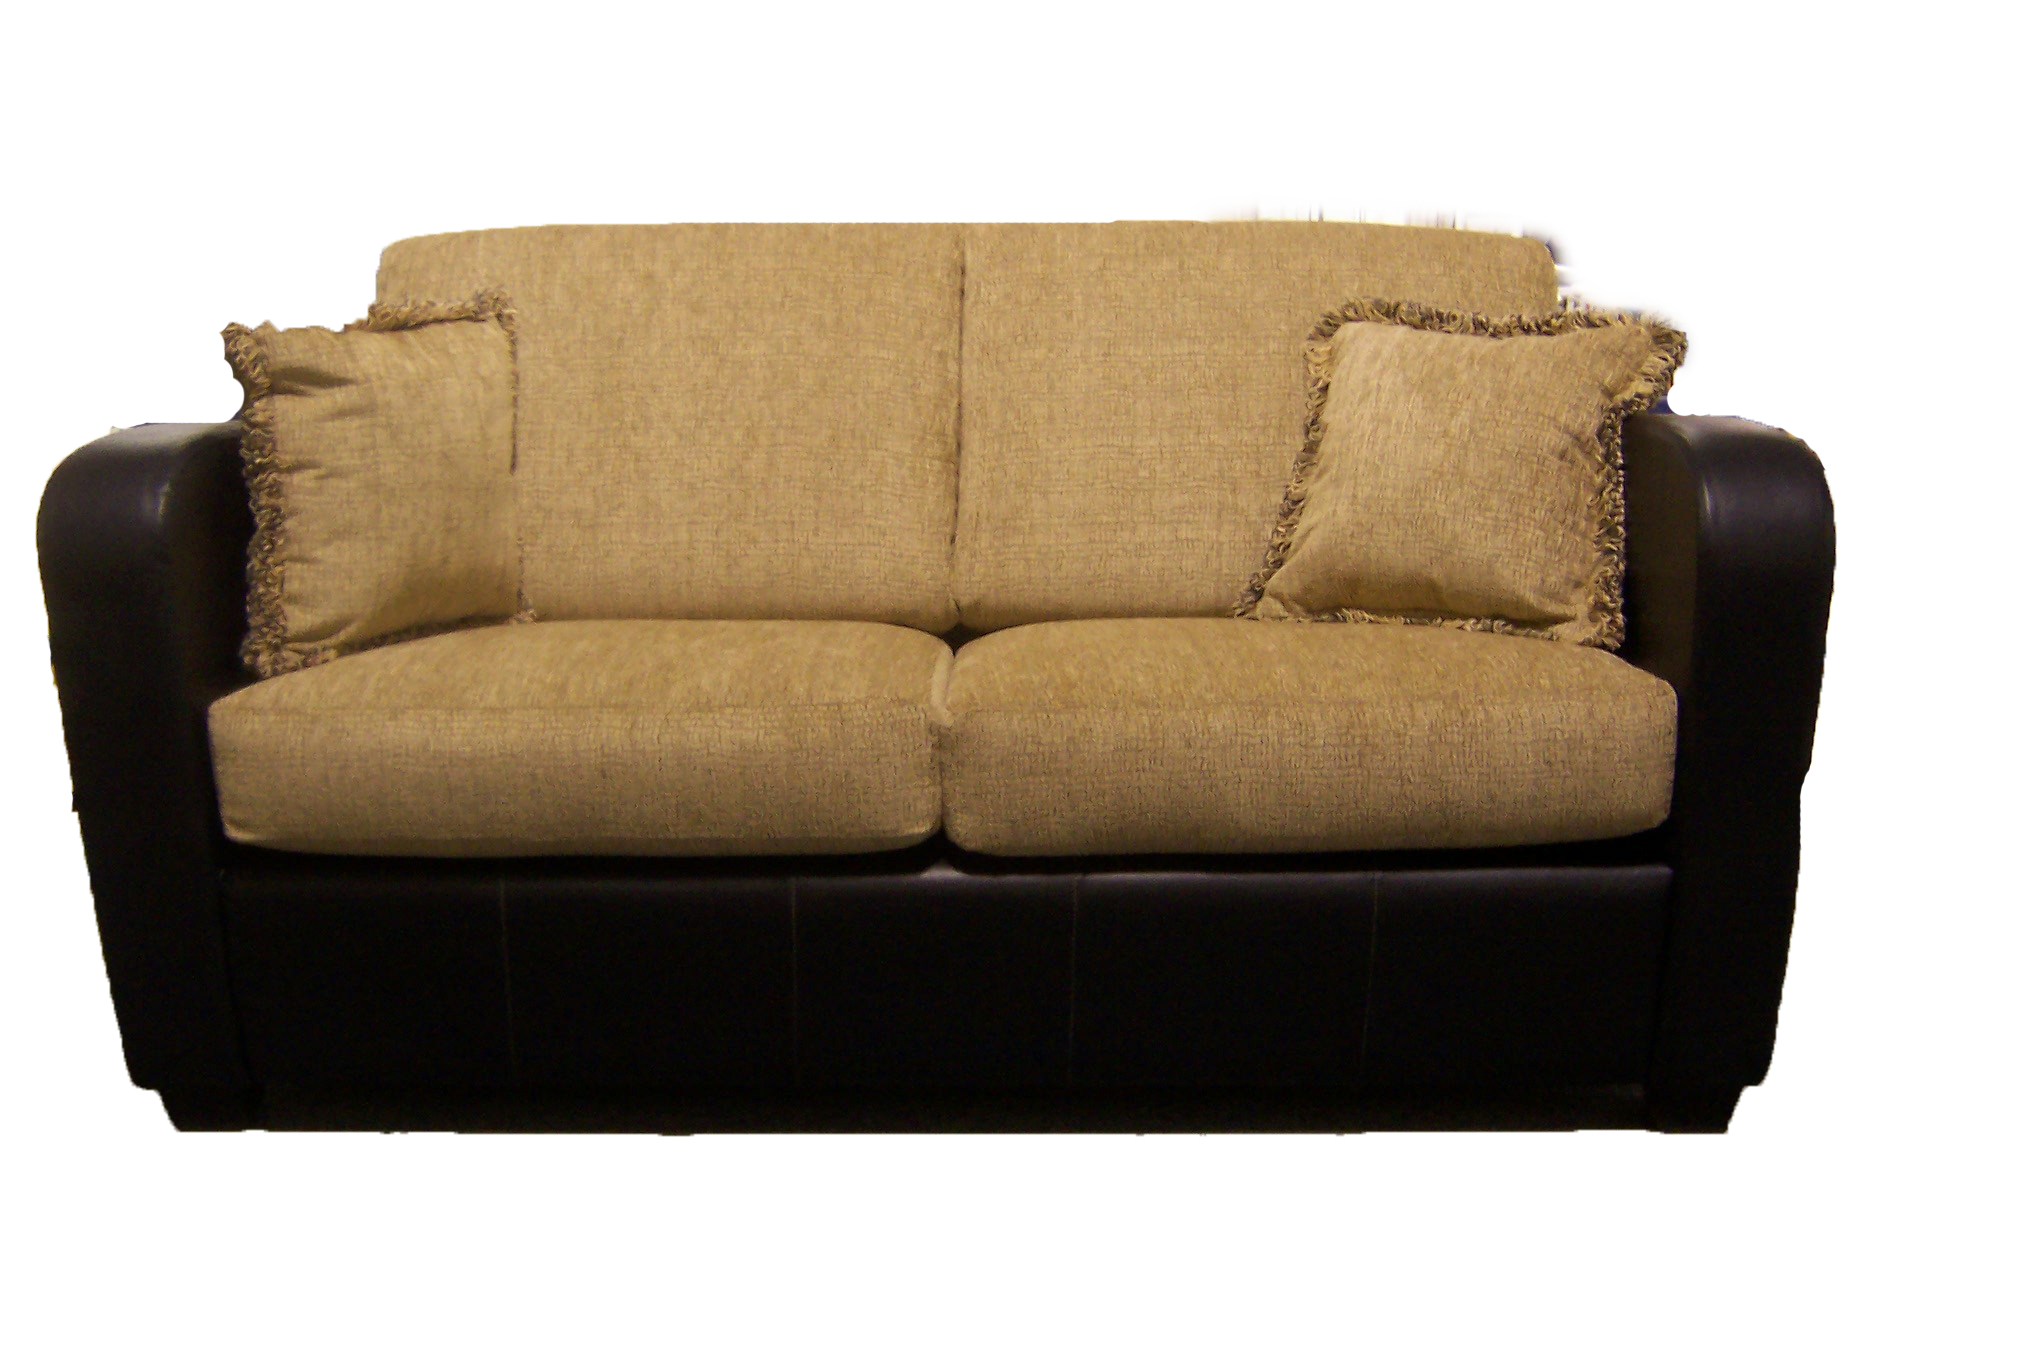 Couch, Sofa, Loveseat, Black,